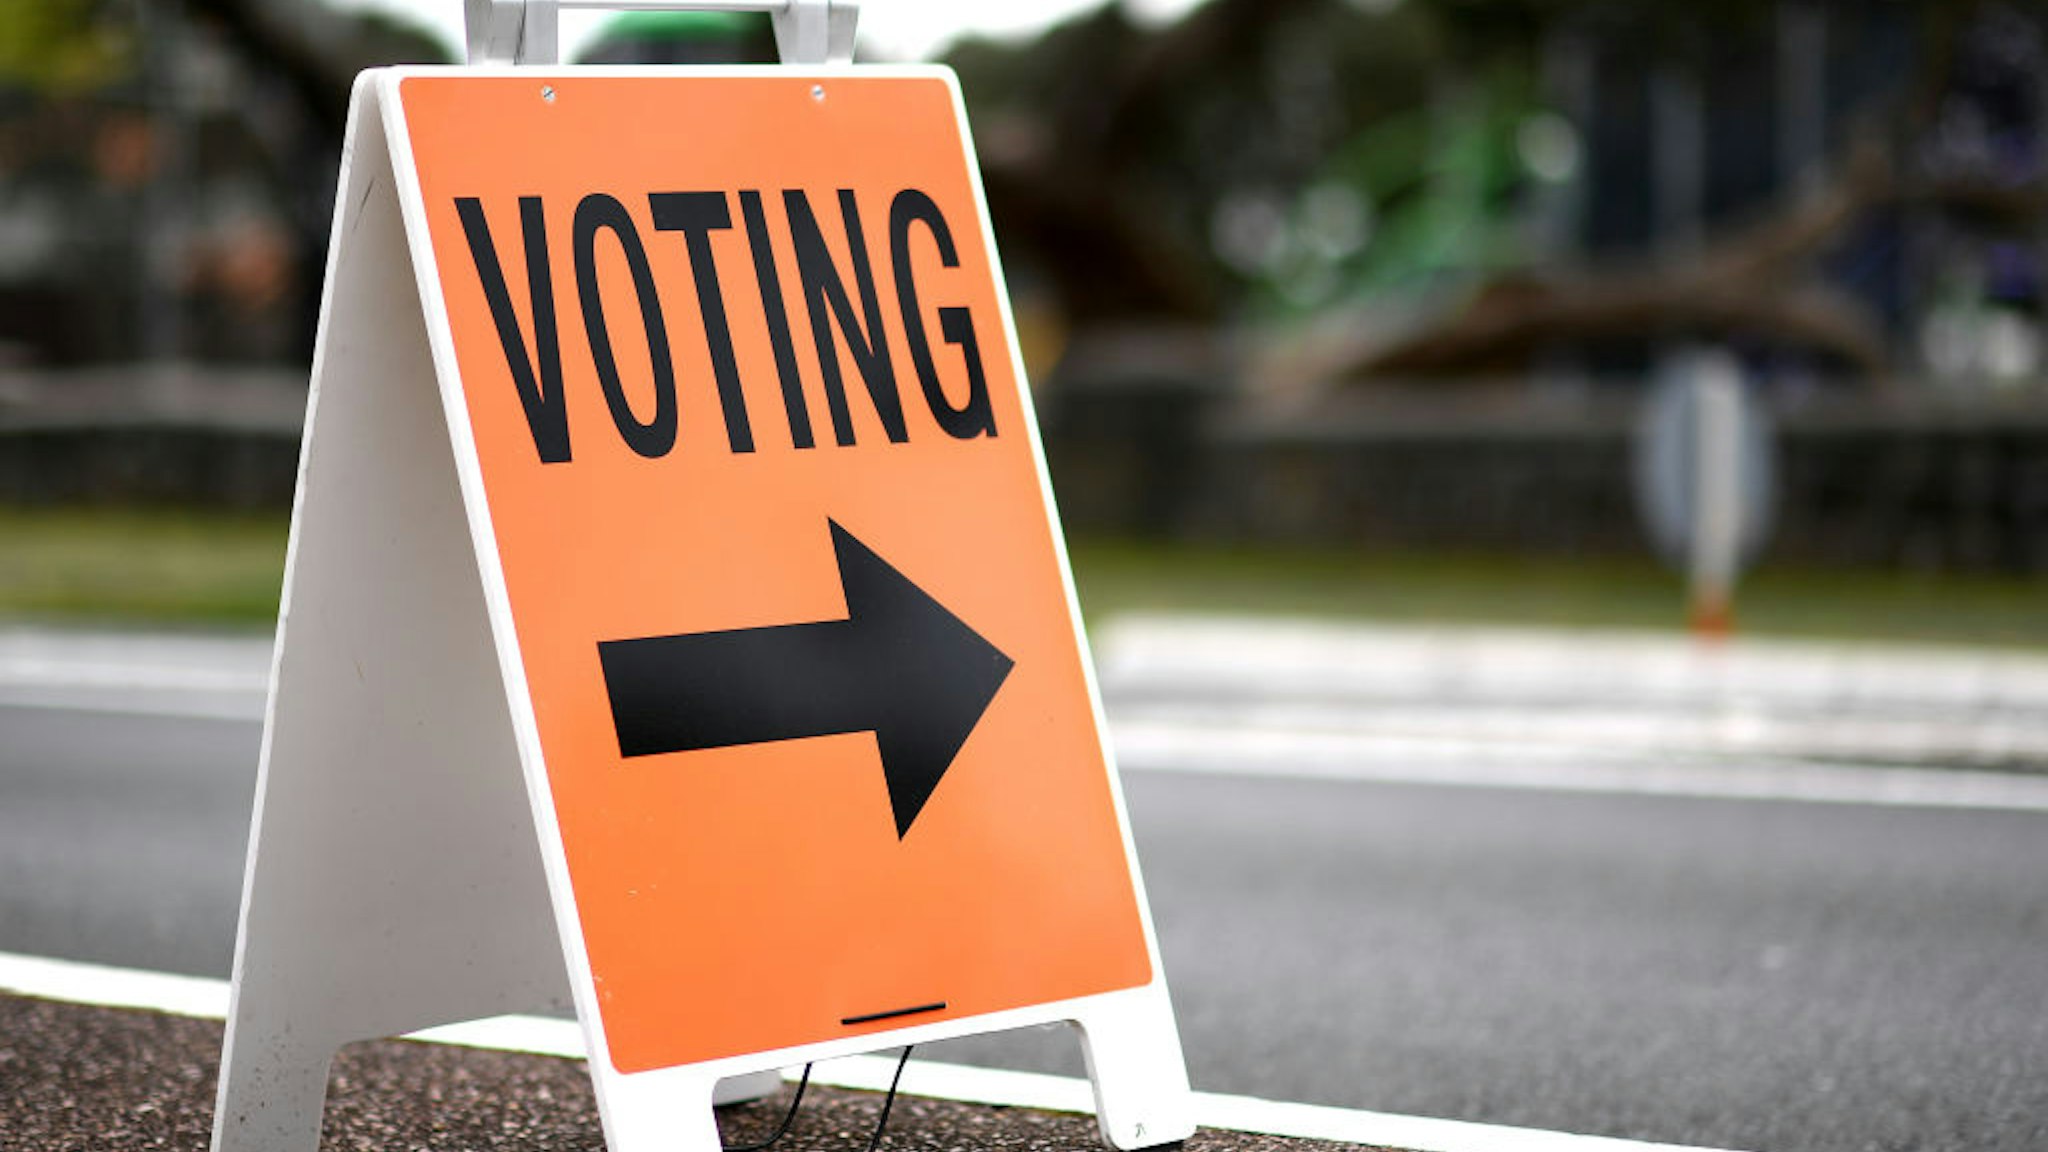 Signage for advance voting is displayed outside a polling booth on October 09, 2020 in Auckland, New Zealand. New Zealanders have been able to cast their votes in advance since October 3 ahead of the 2020 General Election. The 2020 New Zealand General Election was originally due to be held on Saturday 19 September but was delayed due to the re-emergence of COVID-19 in the community. (Photo by Hannah Peters/Getty Images)